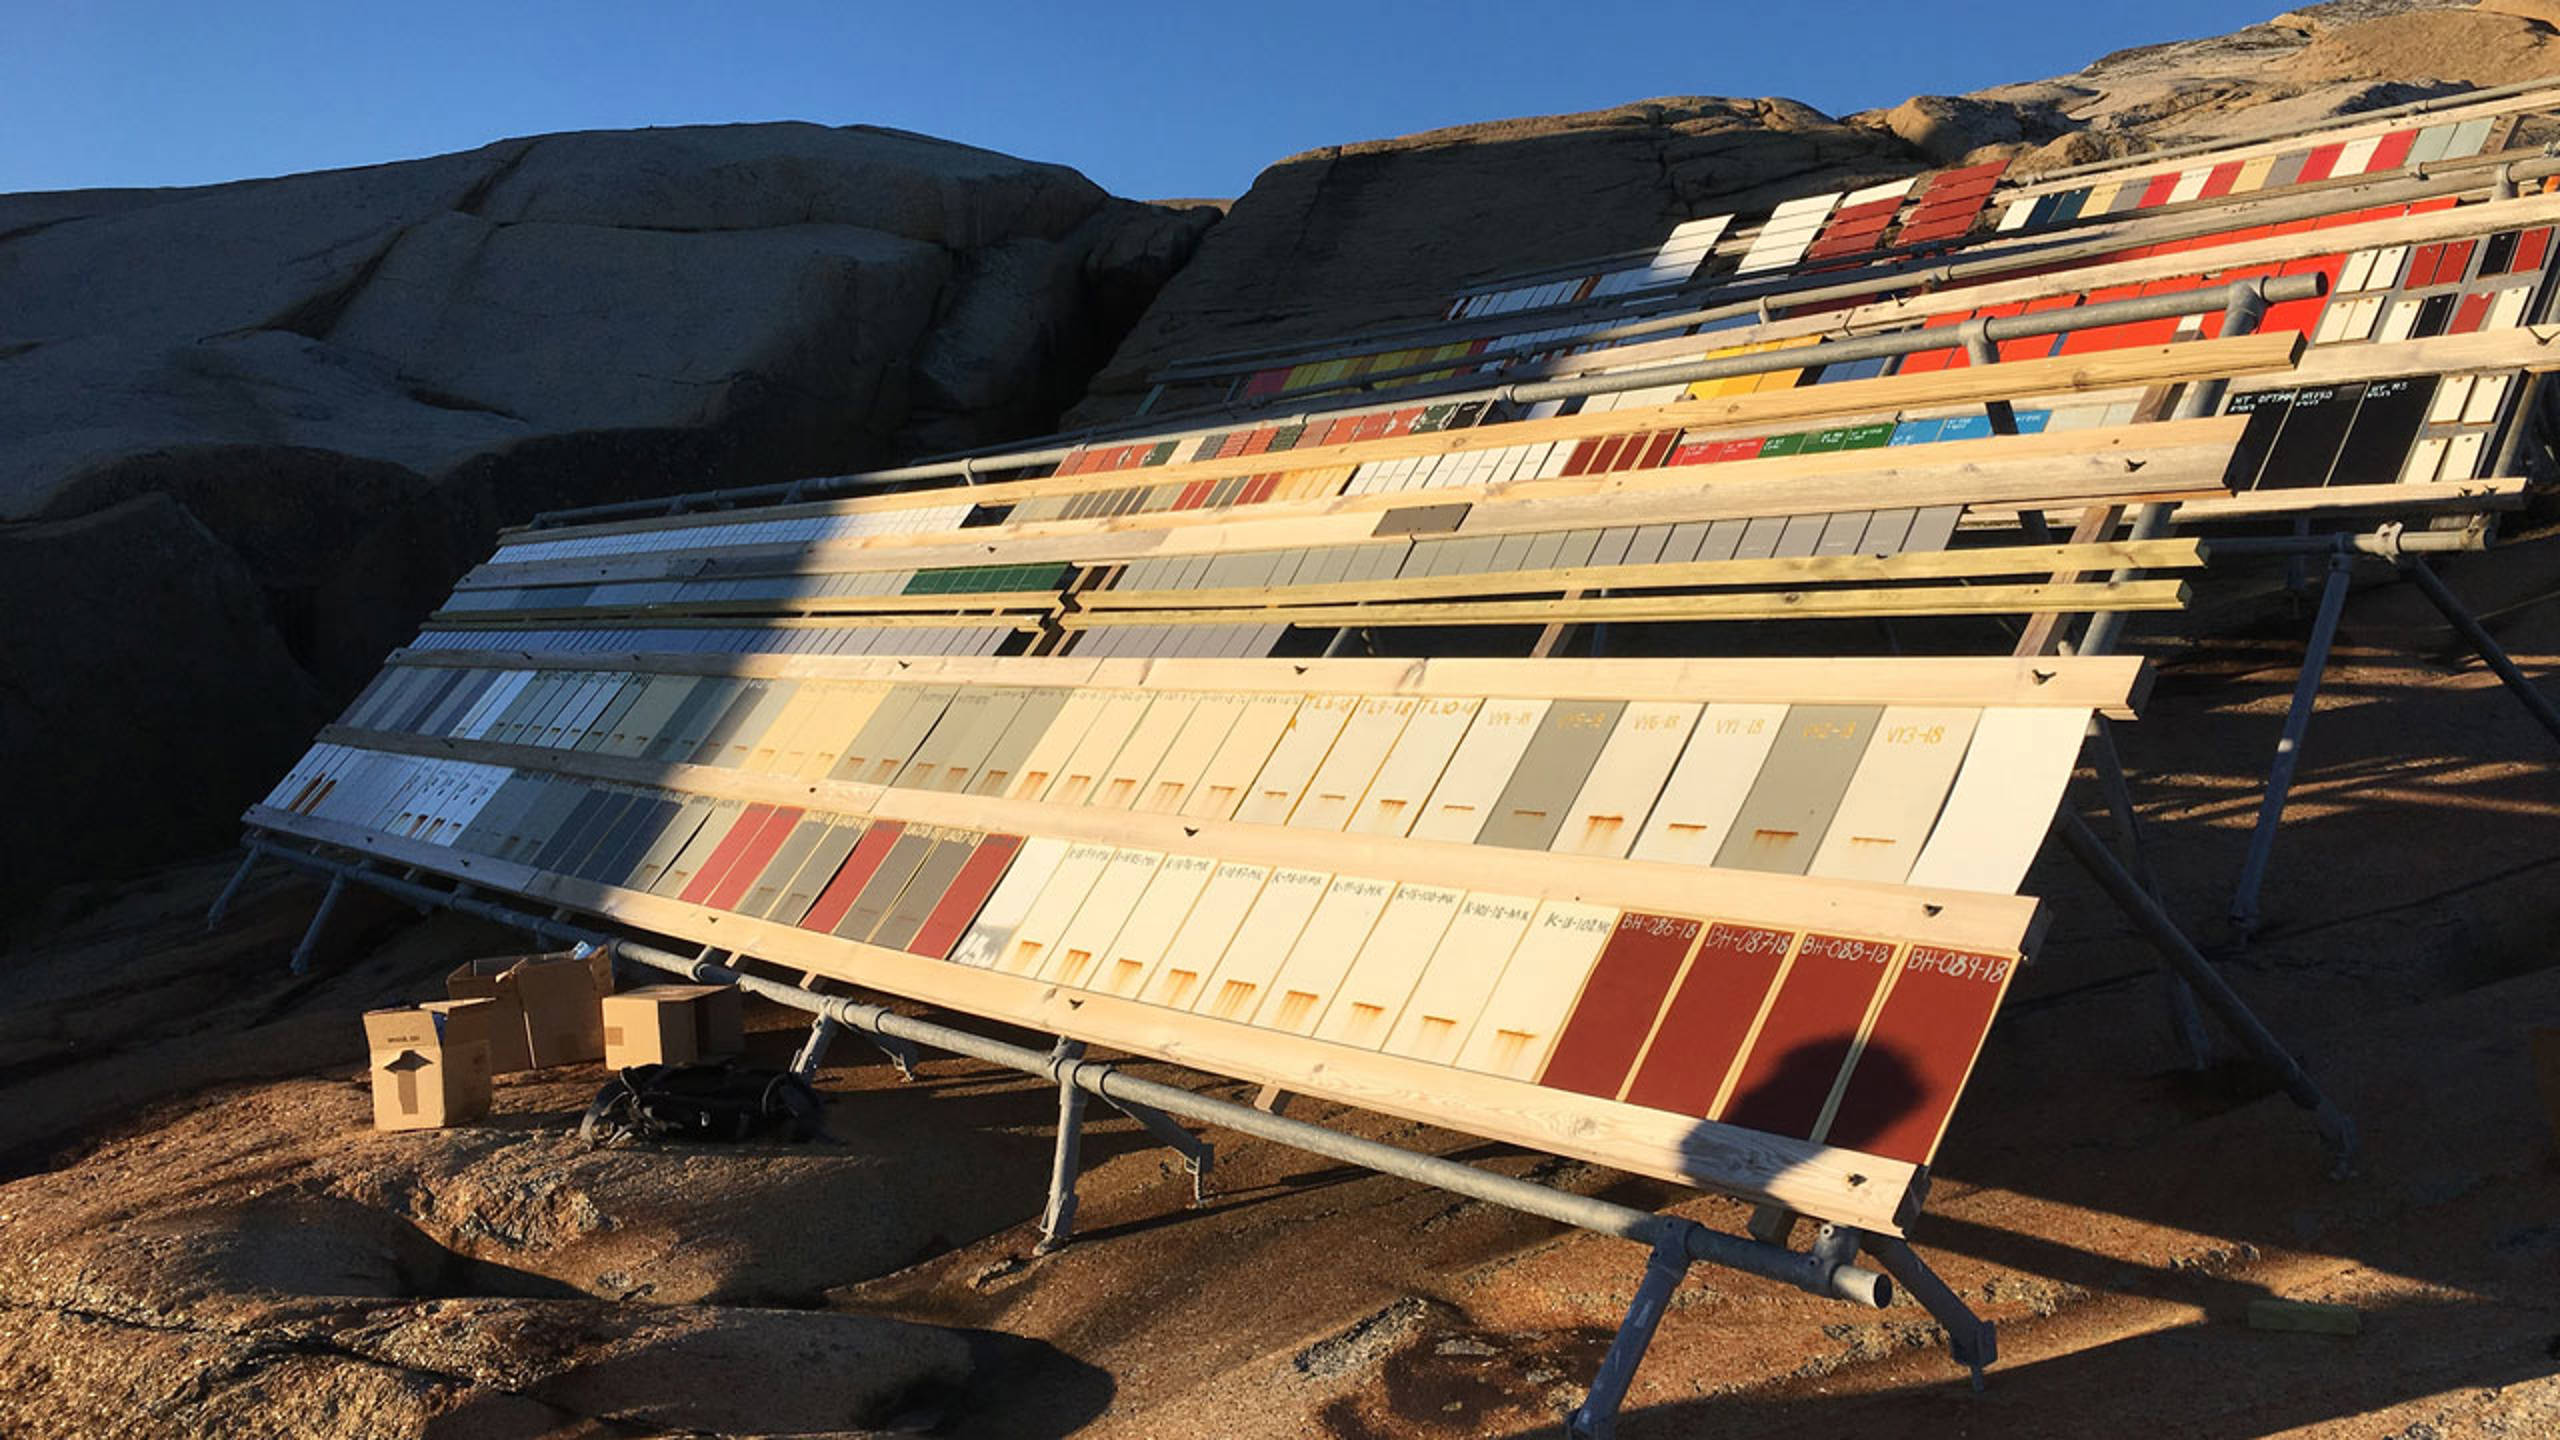 The global paints and coatings company Jotun performs product testing with panels in Kjerringvik, just south of the head quarters in Sandefjord, Norway. 